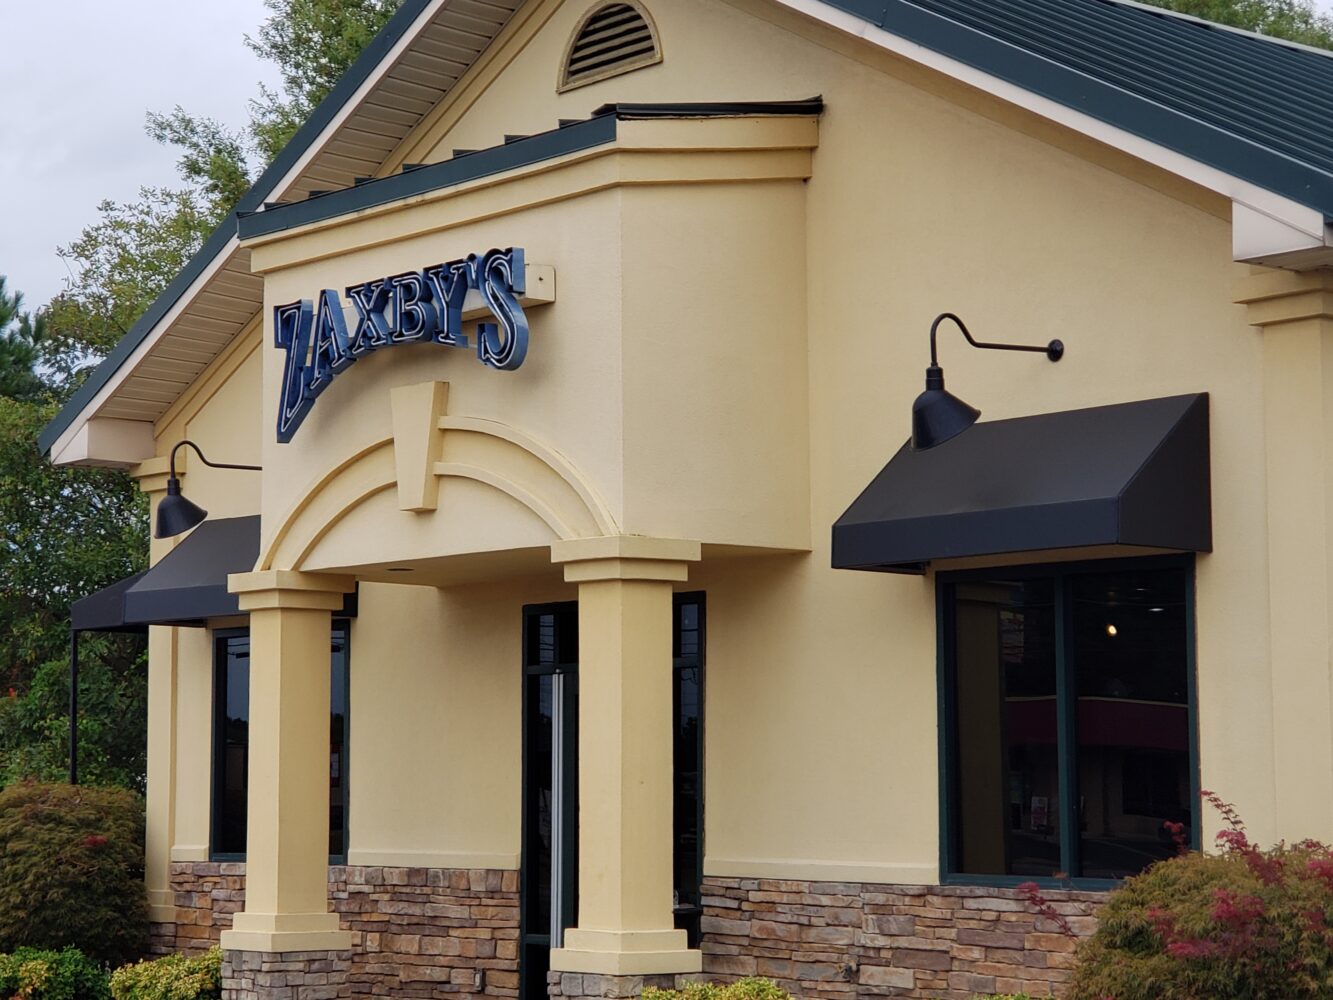 Custom Built Zaxby's restaurant awning with Weather-Chek fabric